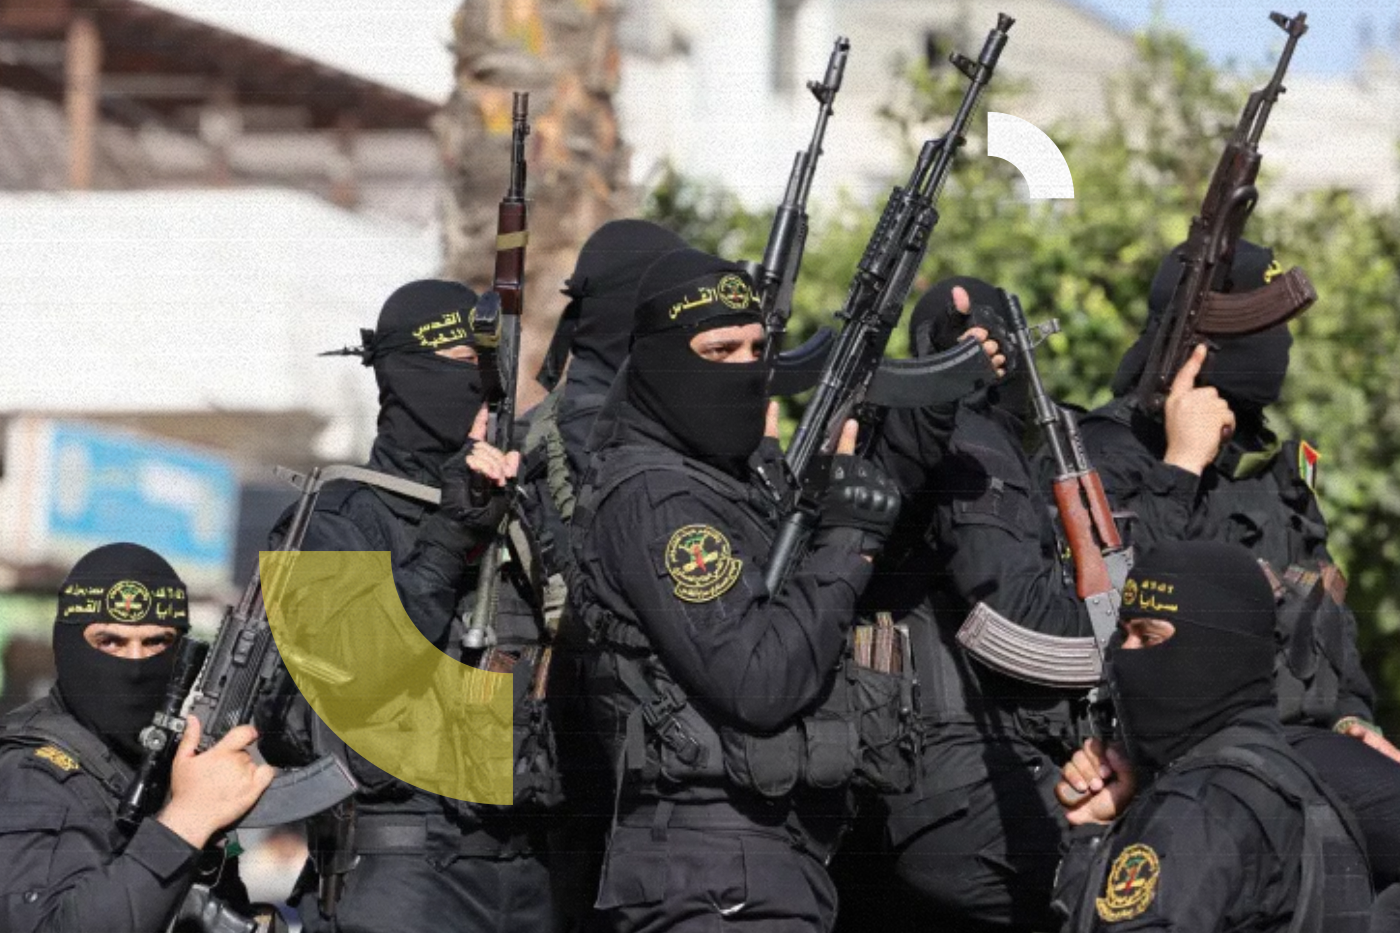 Fighters with the Saraya al-Quds Brigades, the armed wing of the Palestinian Islamic Jihad movement, parade with their weapons in the streets of Gaza City during a rally, on May 29, 2021, more than a week after a ceasefire brought an end to 11 days of hostilities between Israel and Hamas. (Photo by Thomas COEX / AFP) (AFP)